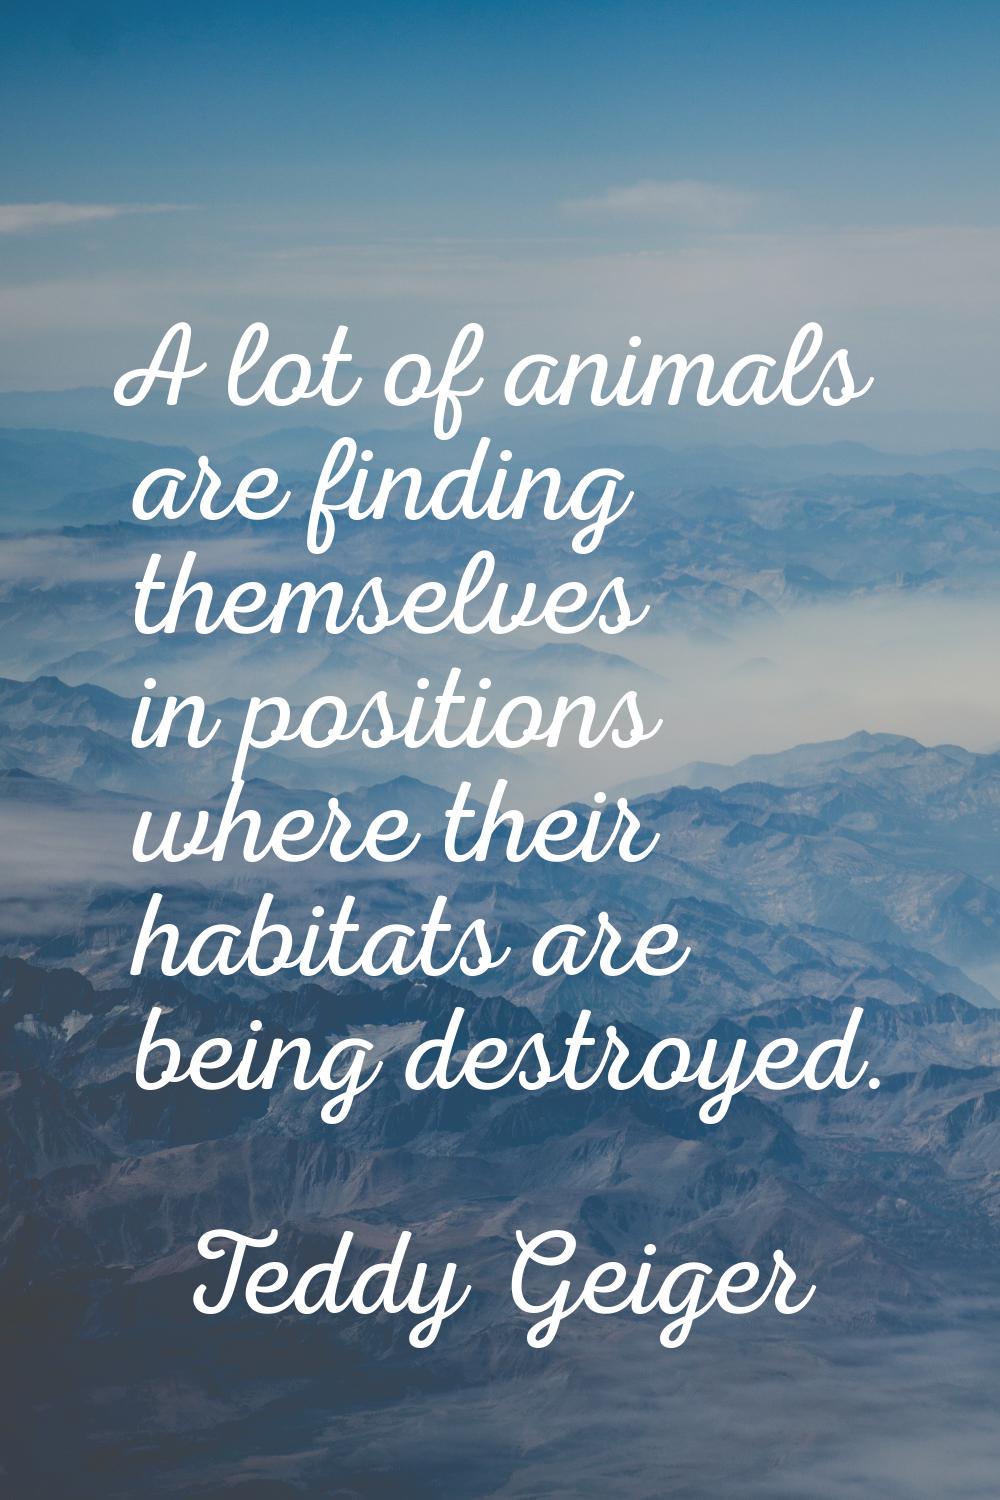 A lot of animals are finding themselves in positions where their habitats are being destroyed.